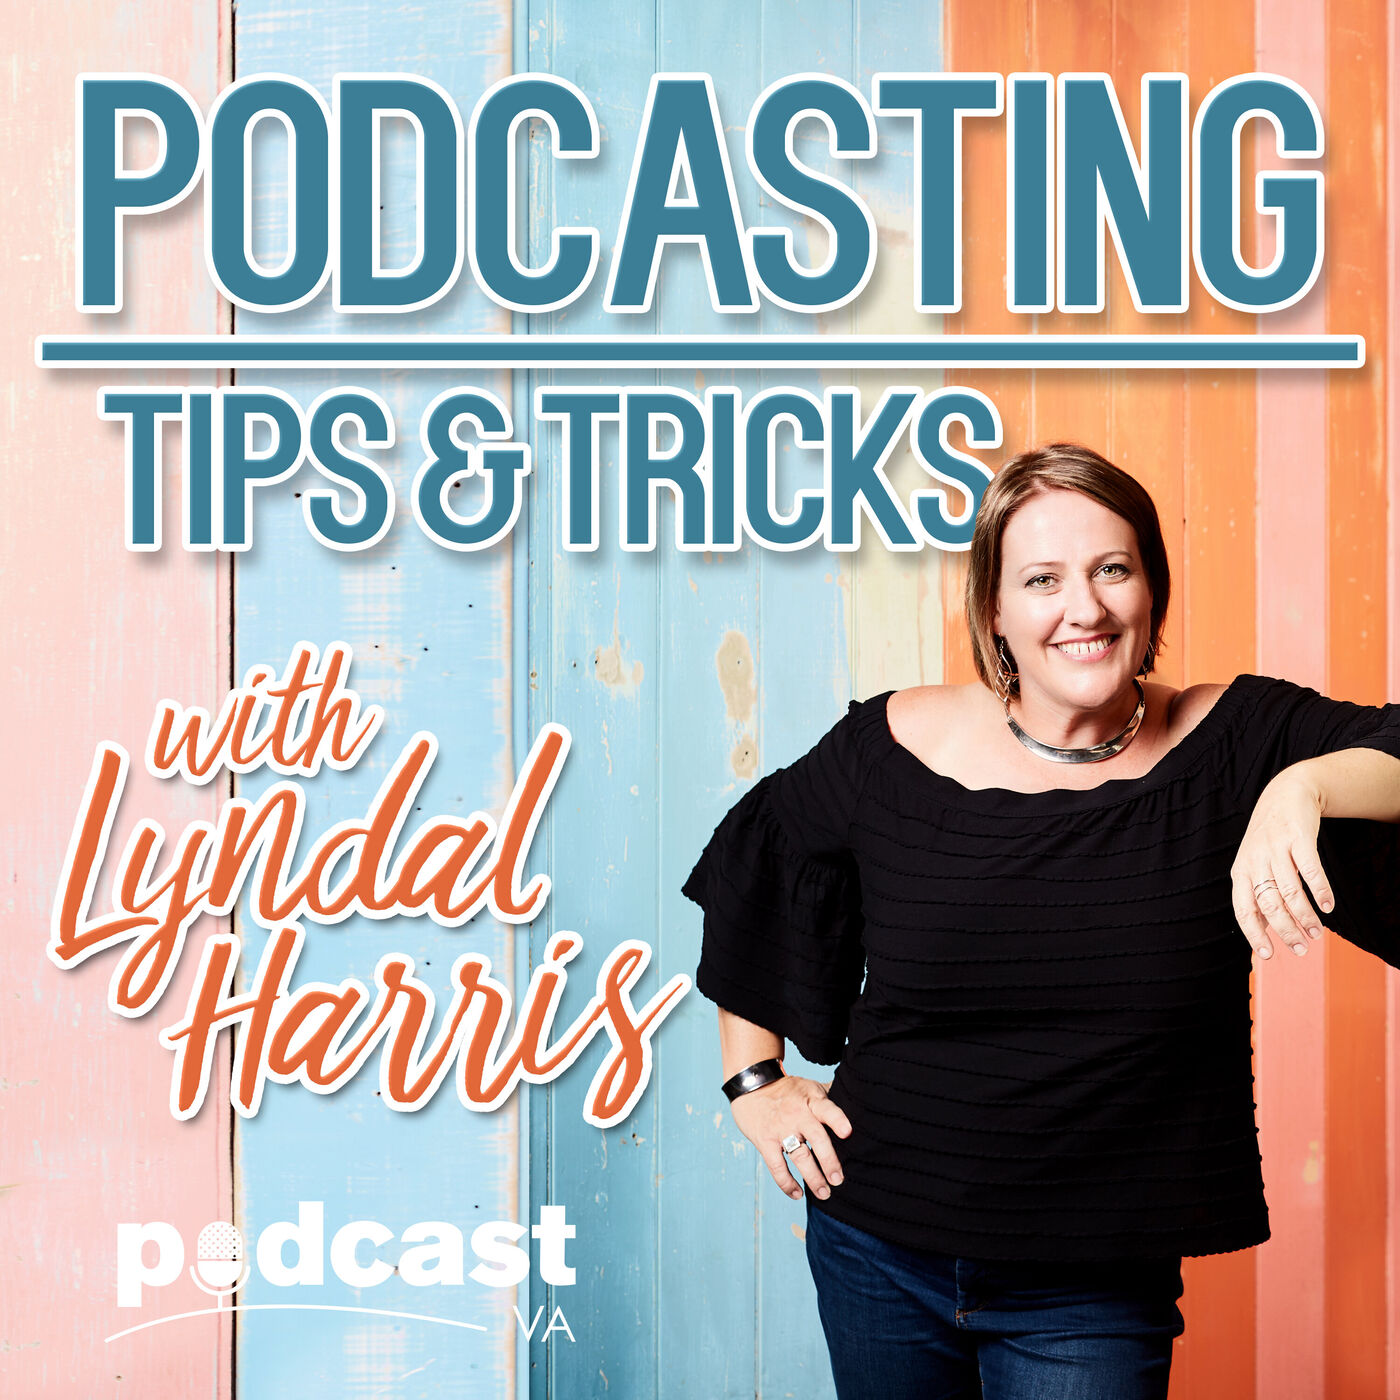 Podcast SEO Tips to Drive More Listens with Kate Toon